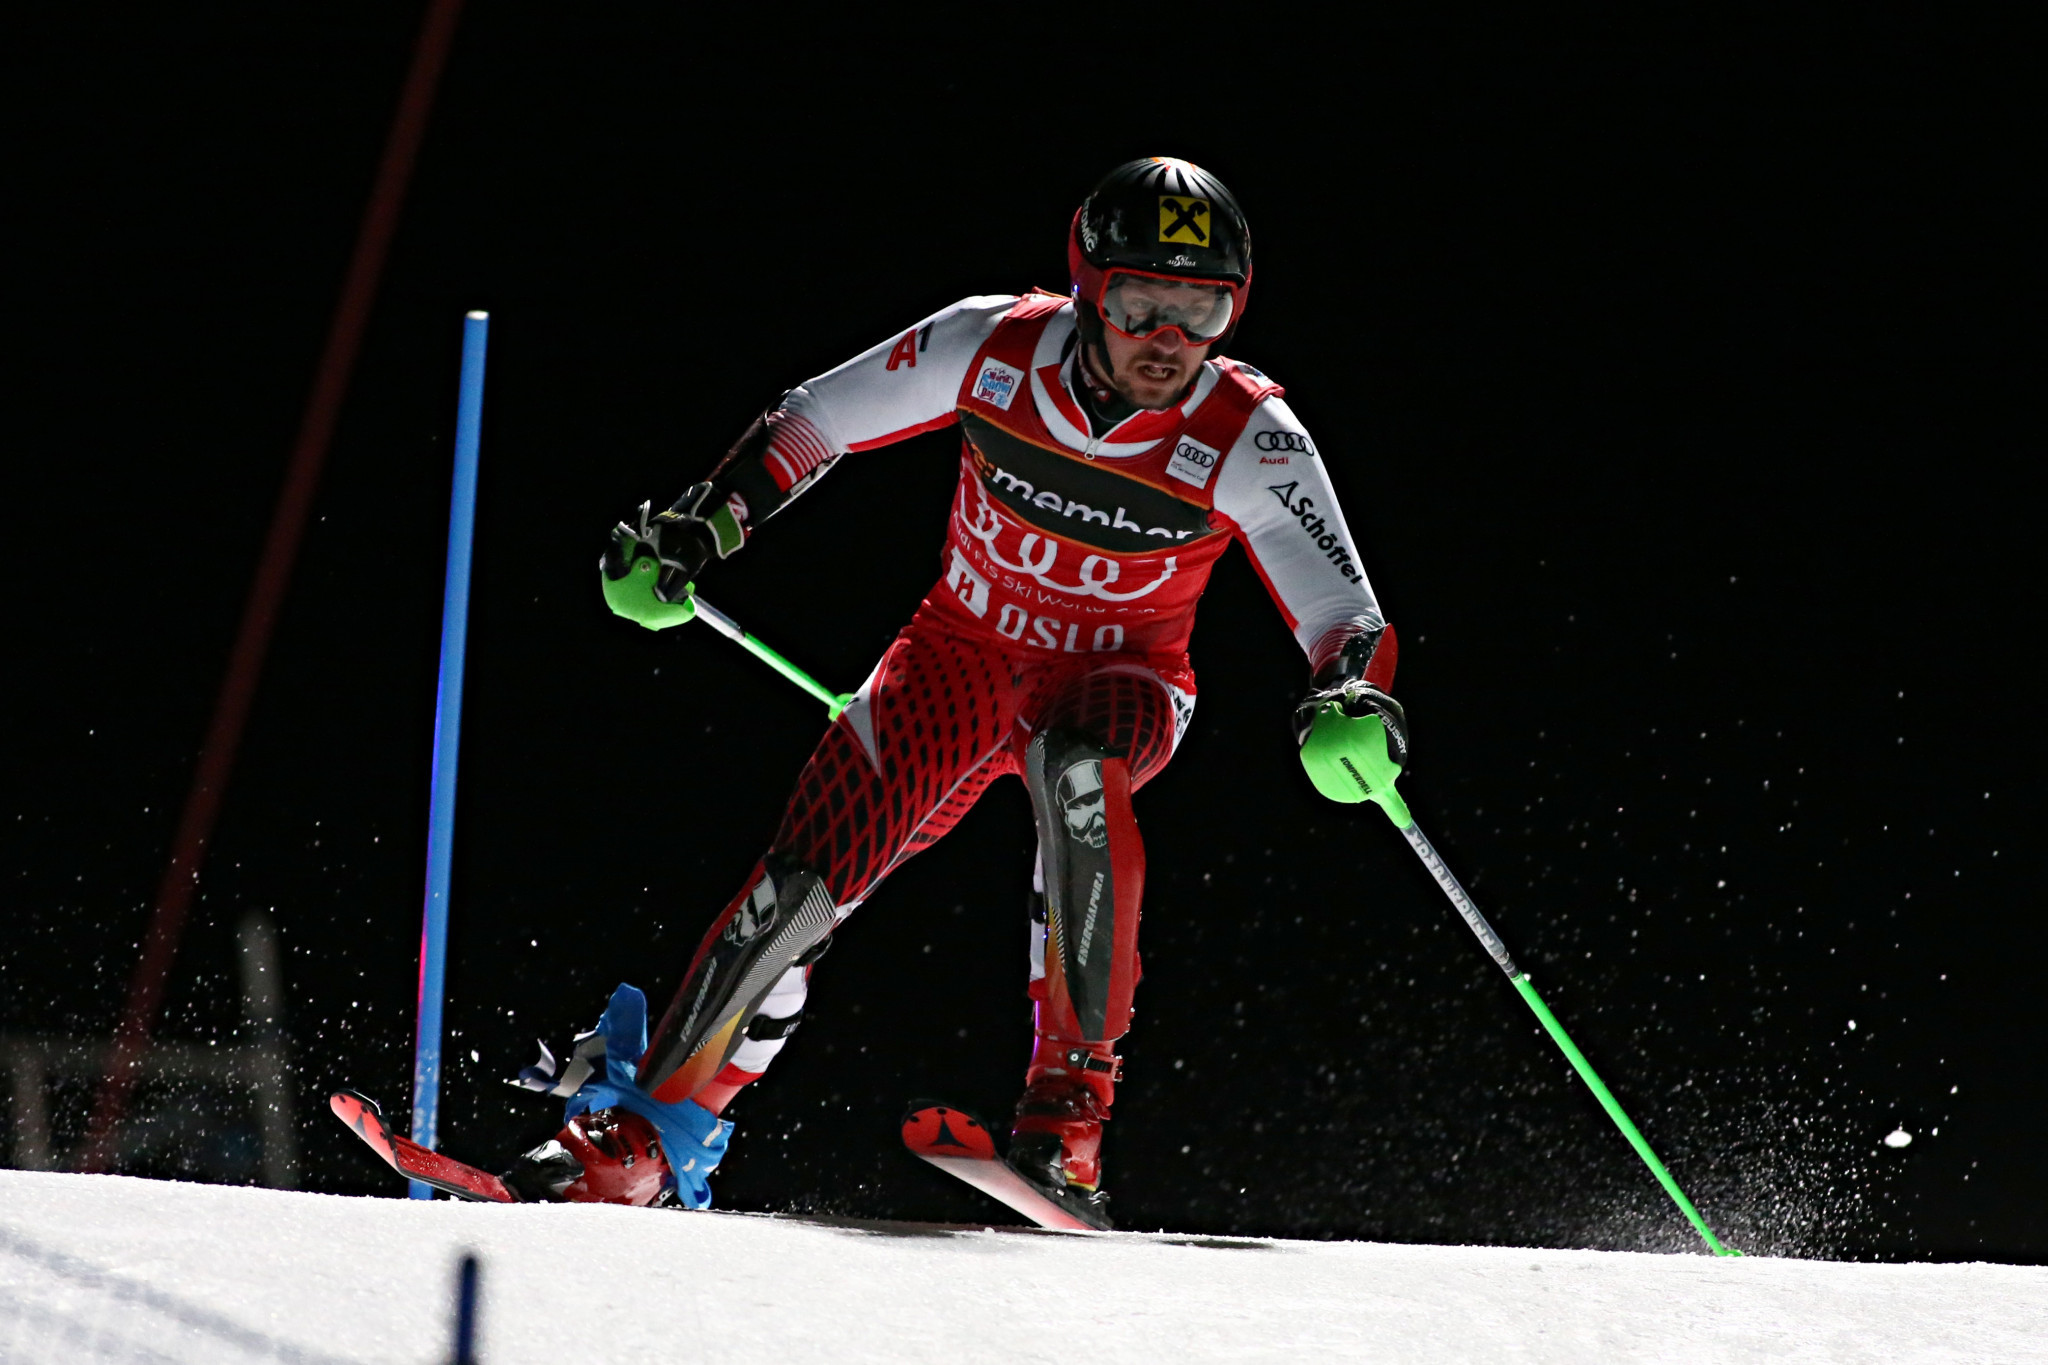 A mistake from Austria's Marcel Hirscher as he crashed through a gate in this quarter-final against Britain's Dave Ryding saw him miss the podium entirely at the FIS Alpine Skiing World Cup event in Oslo ©Getty Images